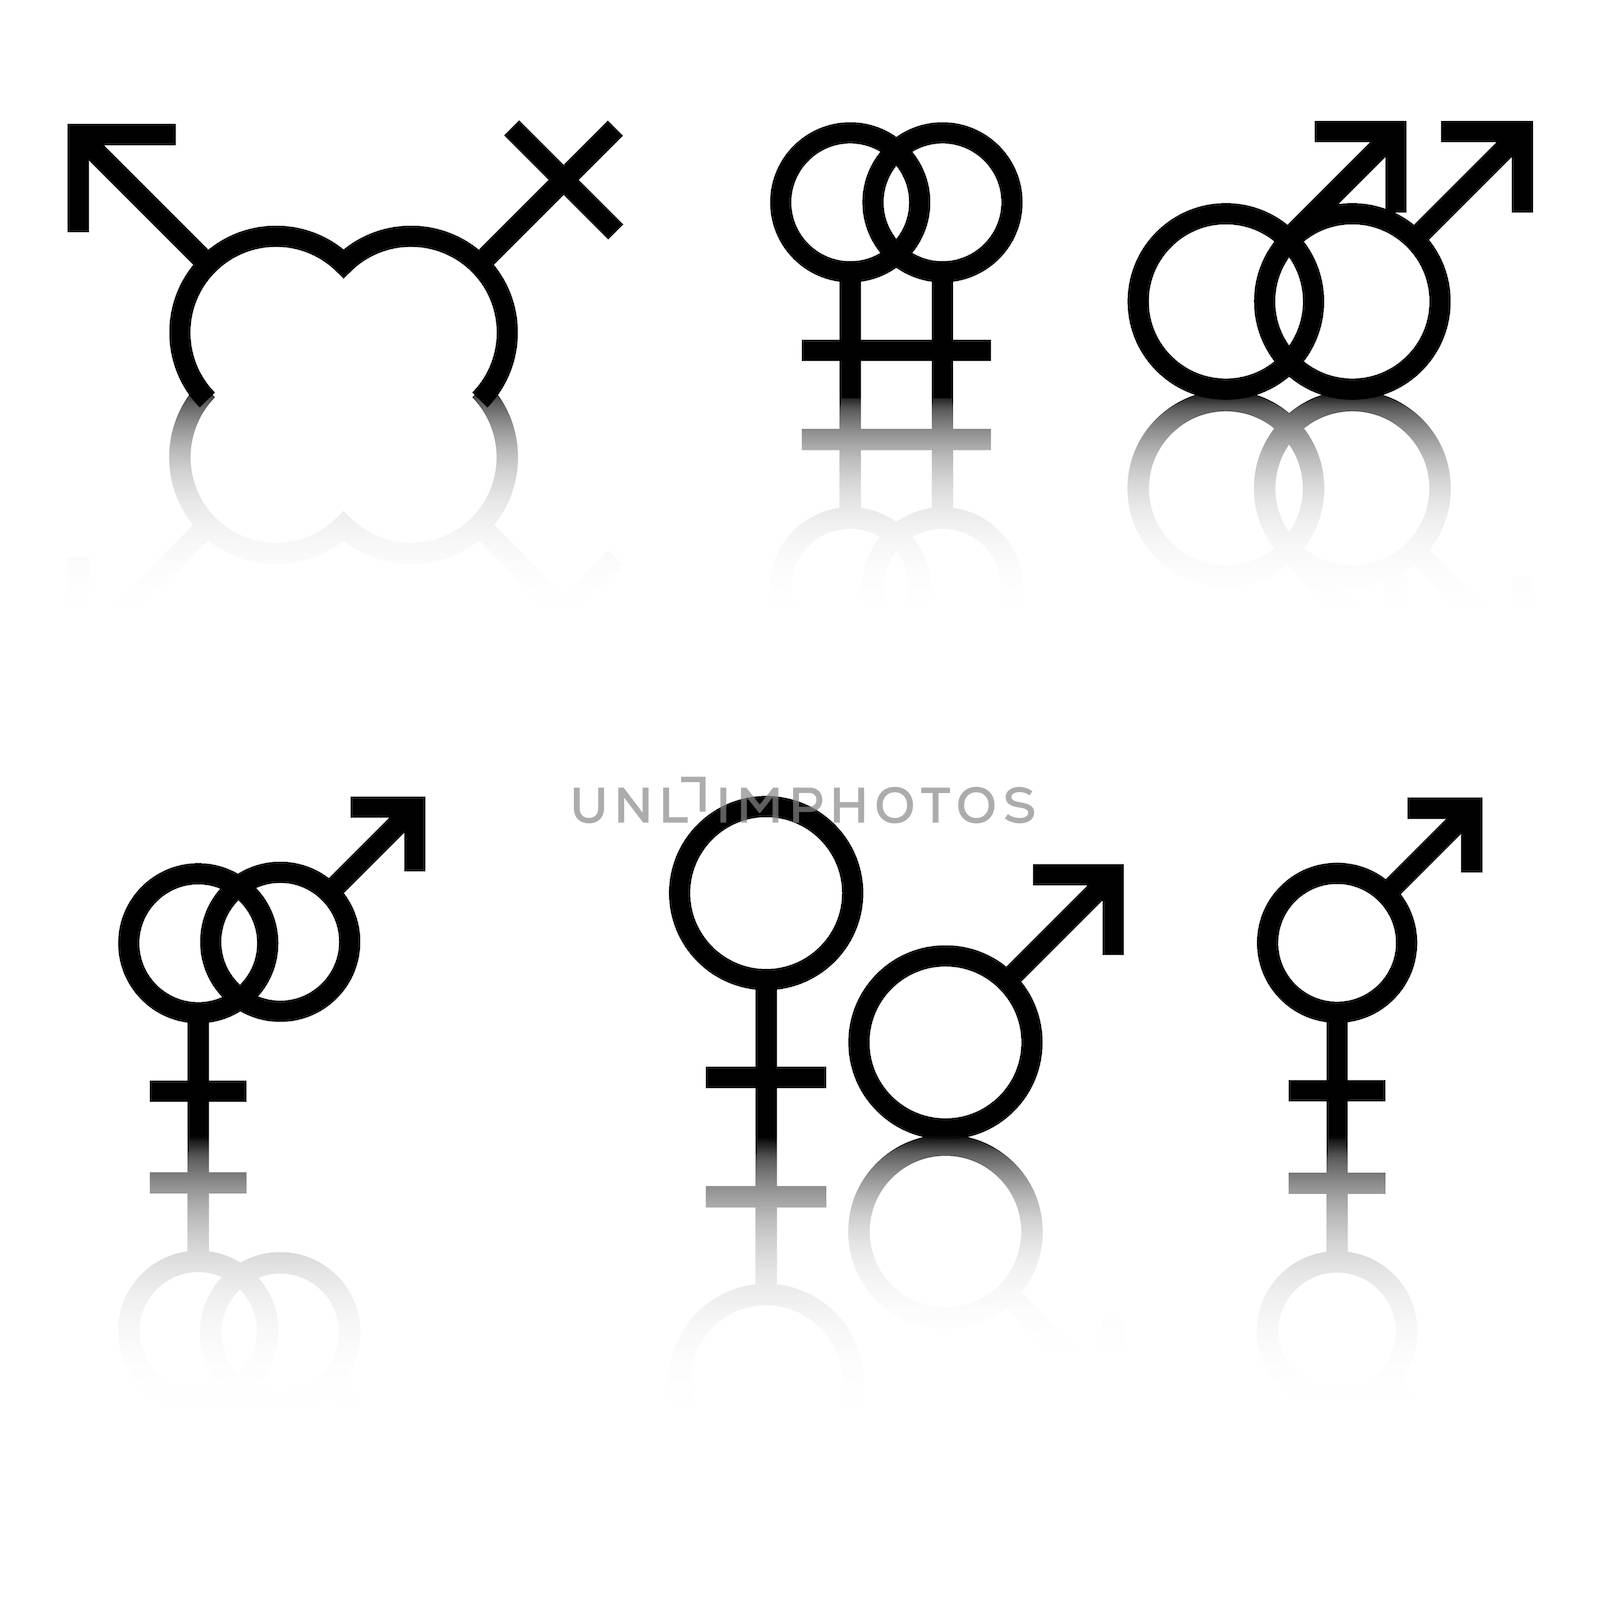 Illustration of male and female sex symbol in colour and black a by DragonEyeMedia